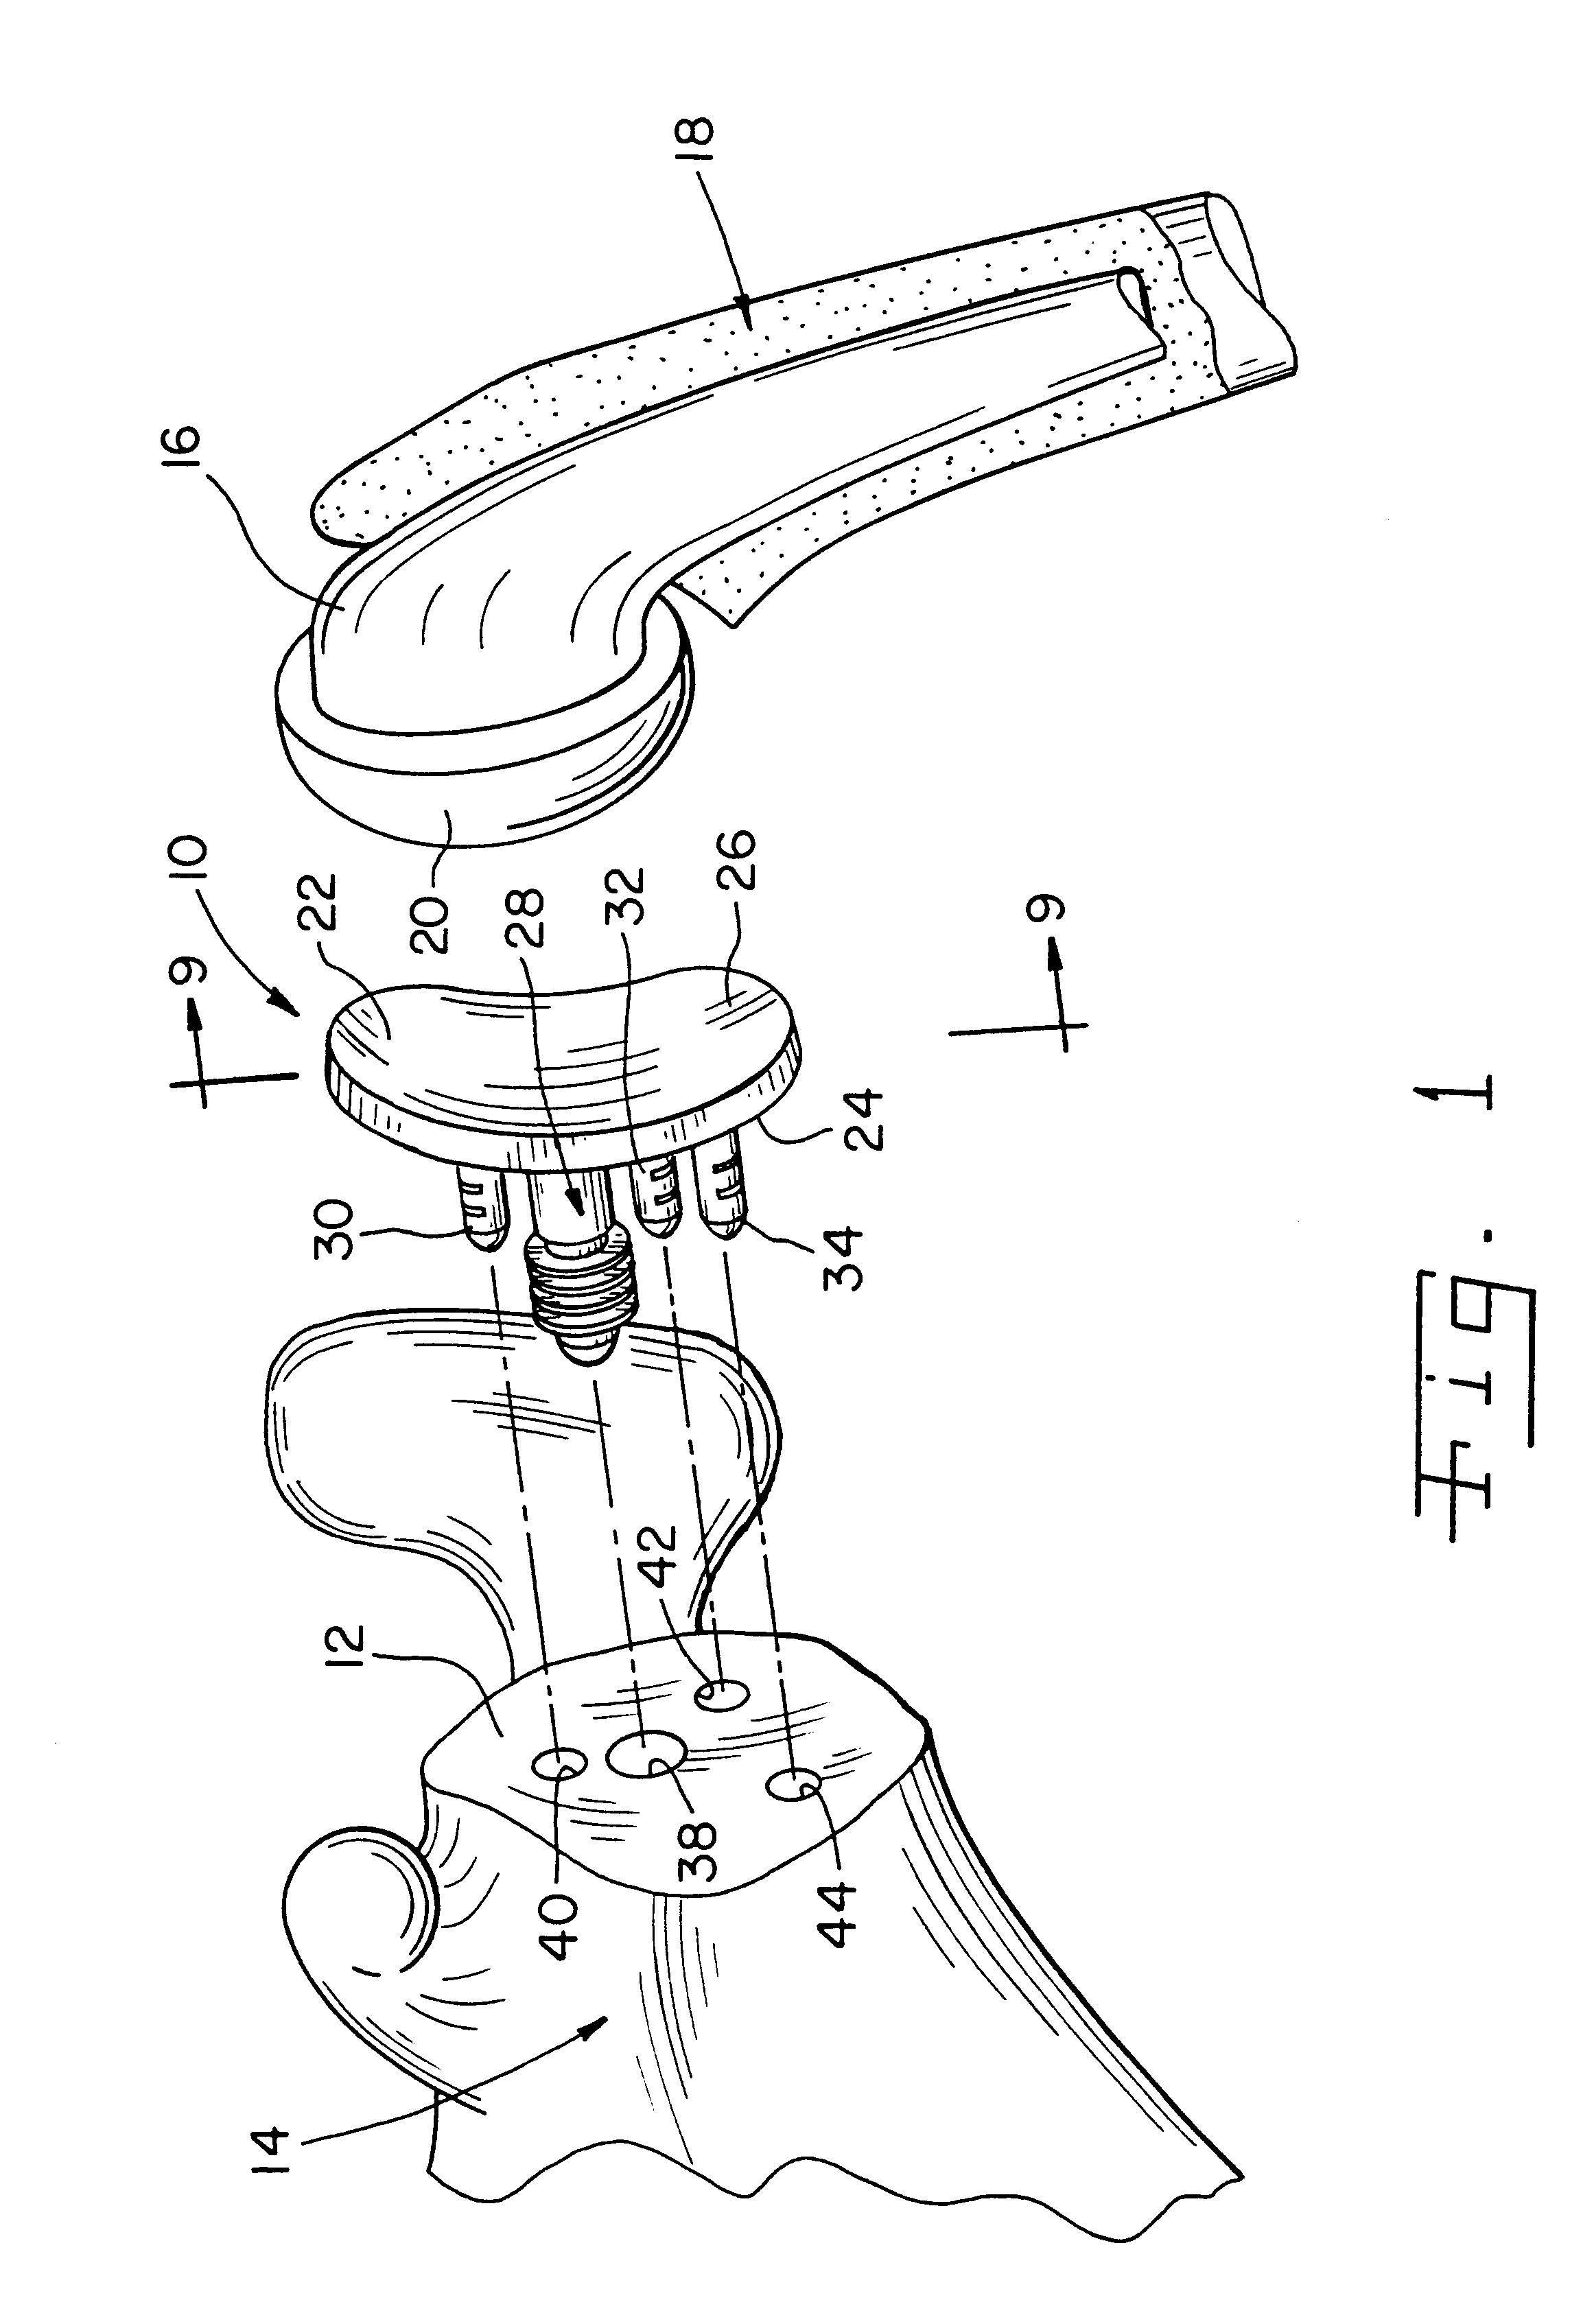 Apparatus and method for securing a cementless glenoid component to a glenoid surface of a scapula